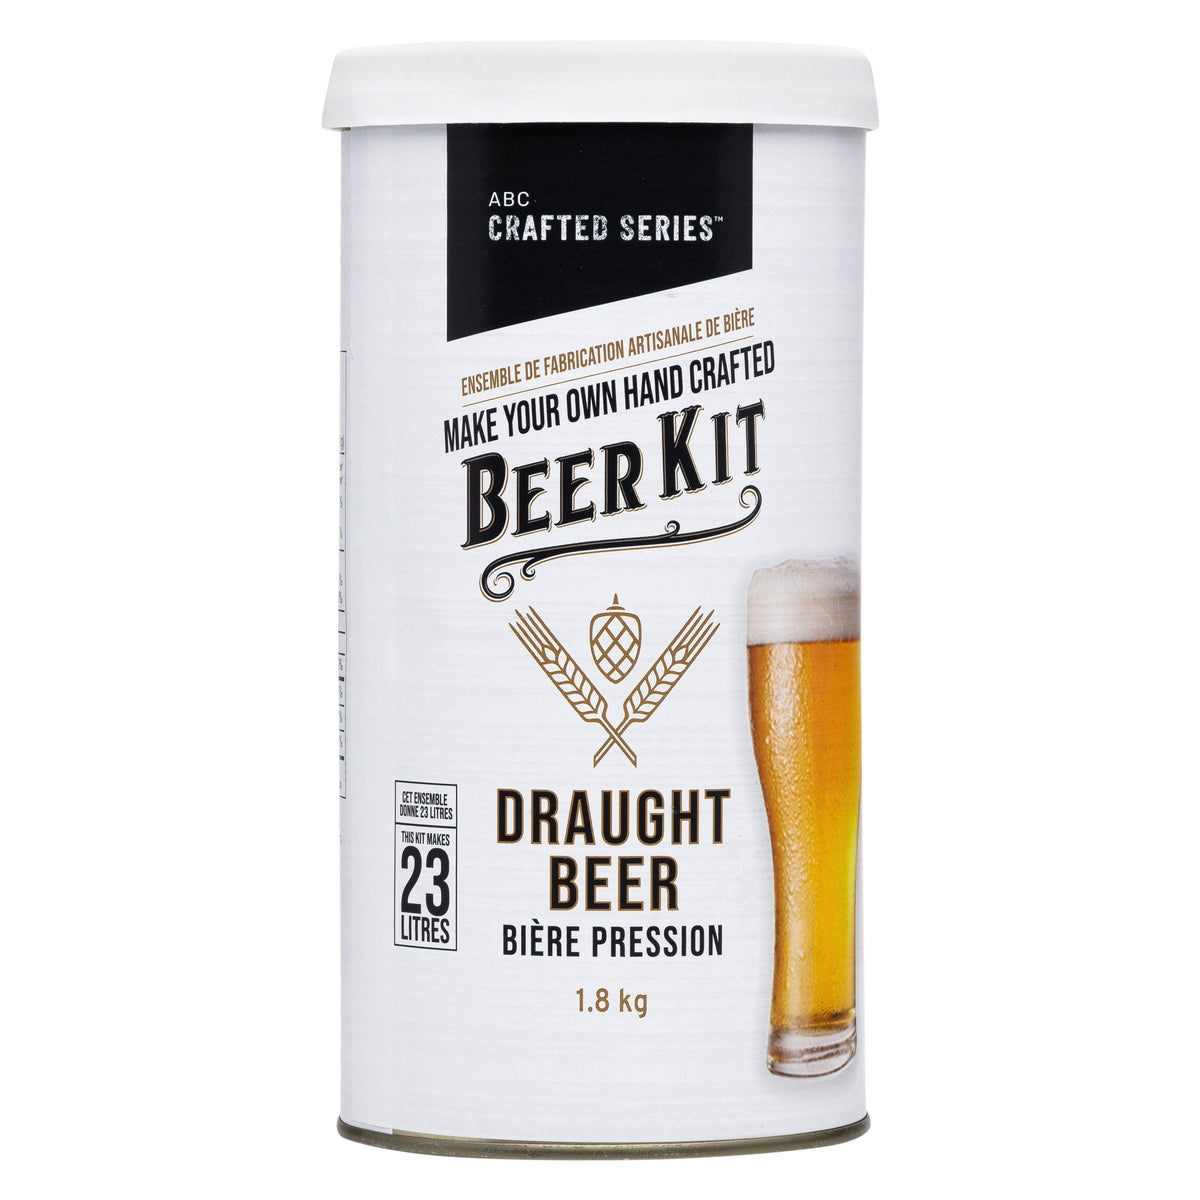 Draught Beer Kit Pouch (1.8 kg